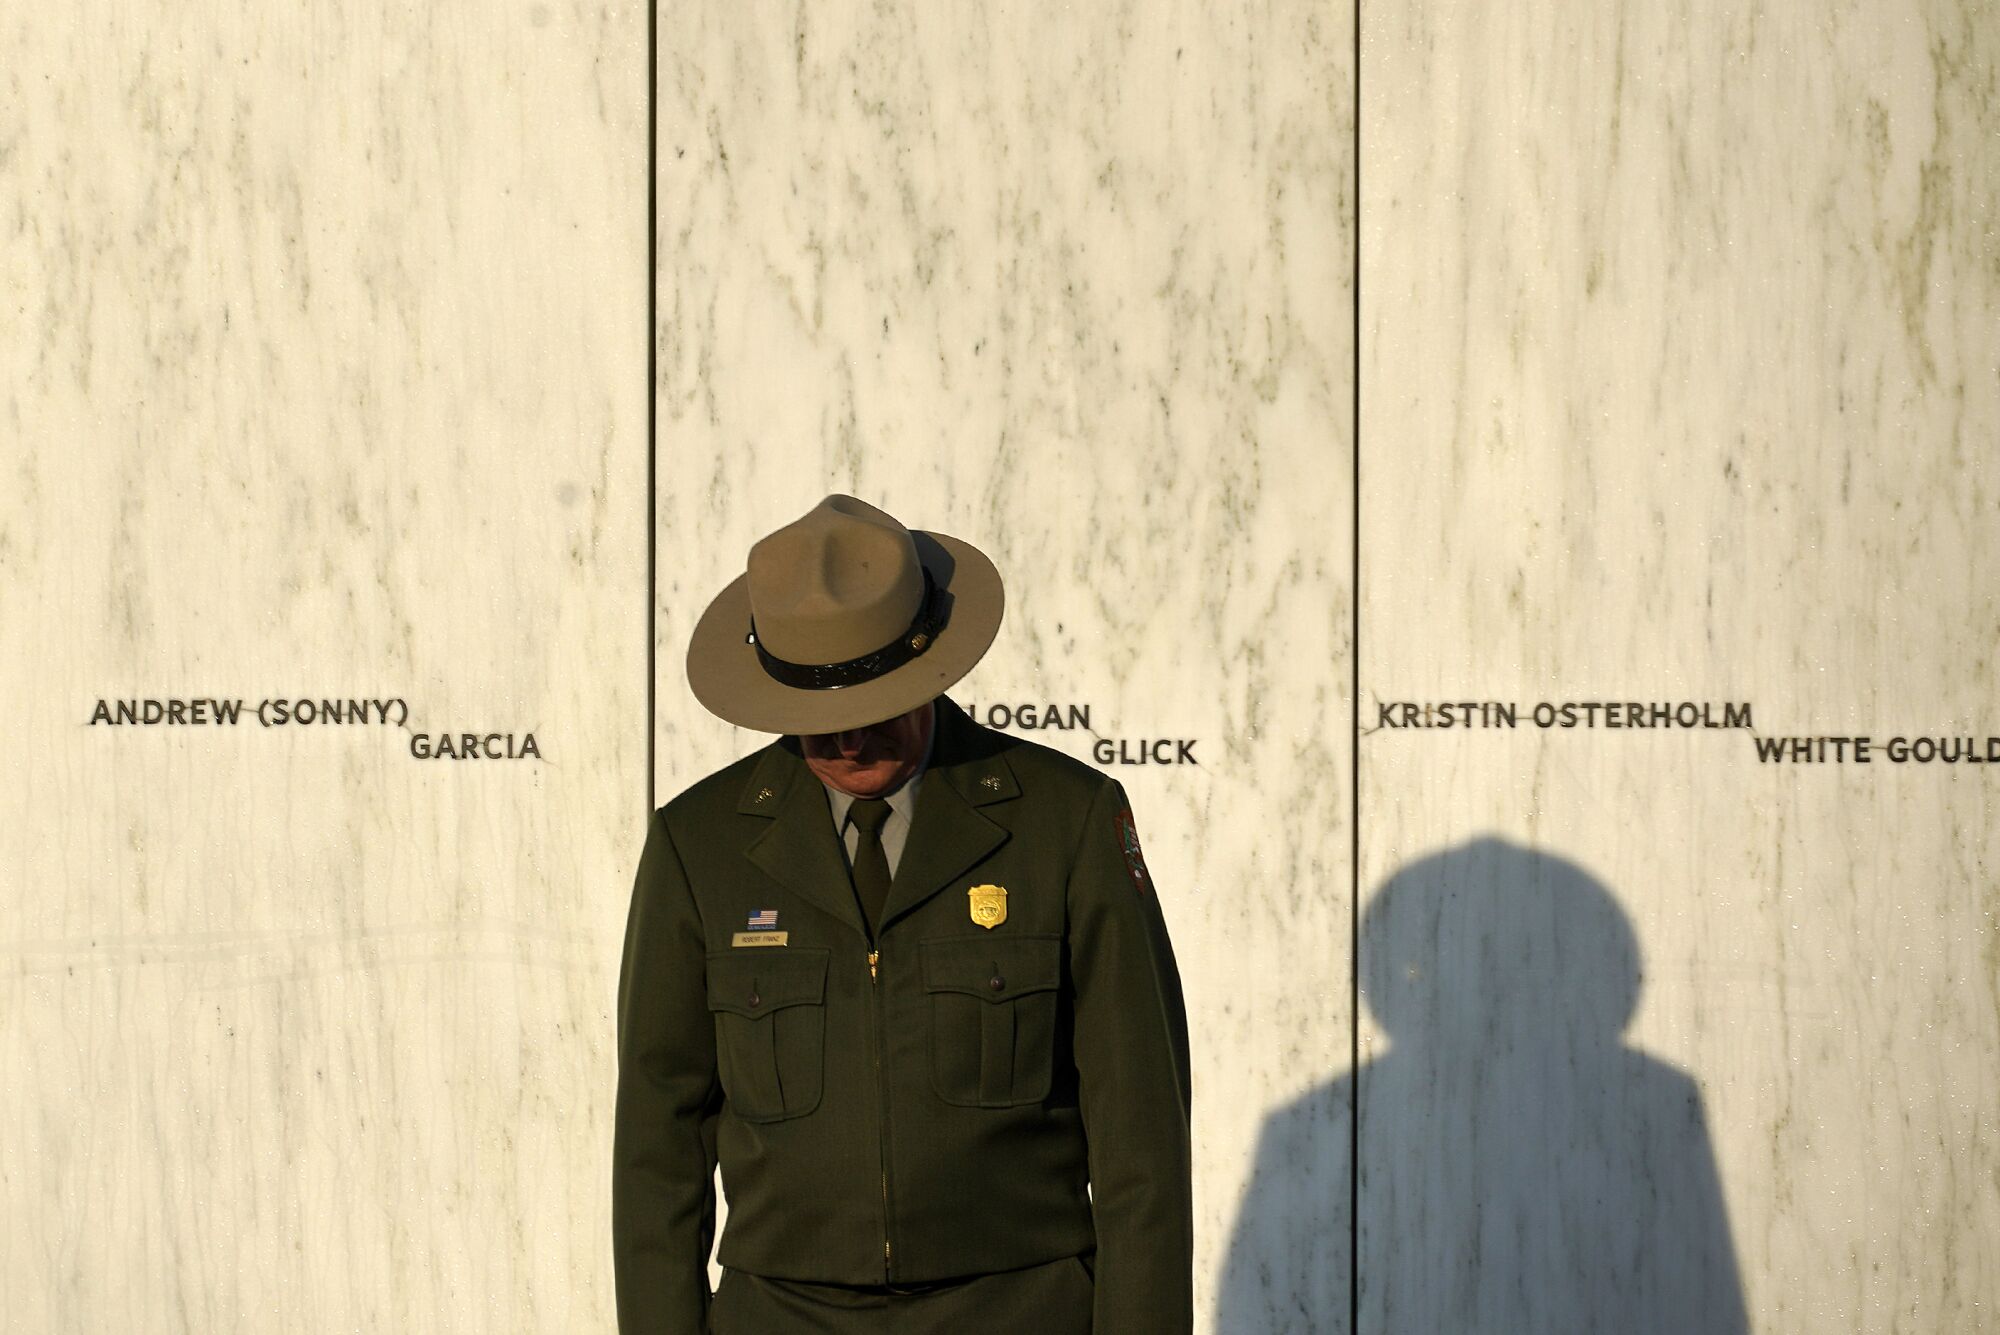 A National Park Service ranger stands in front of the Wall of Names.